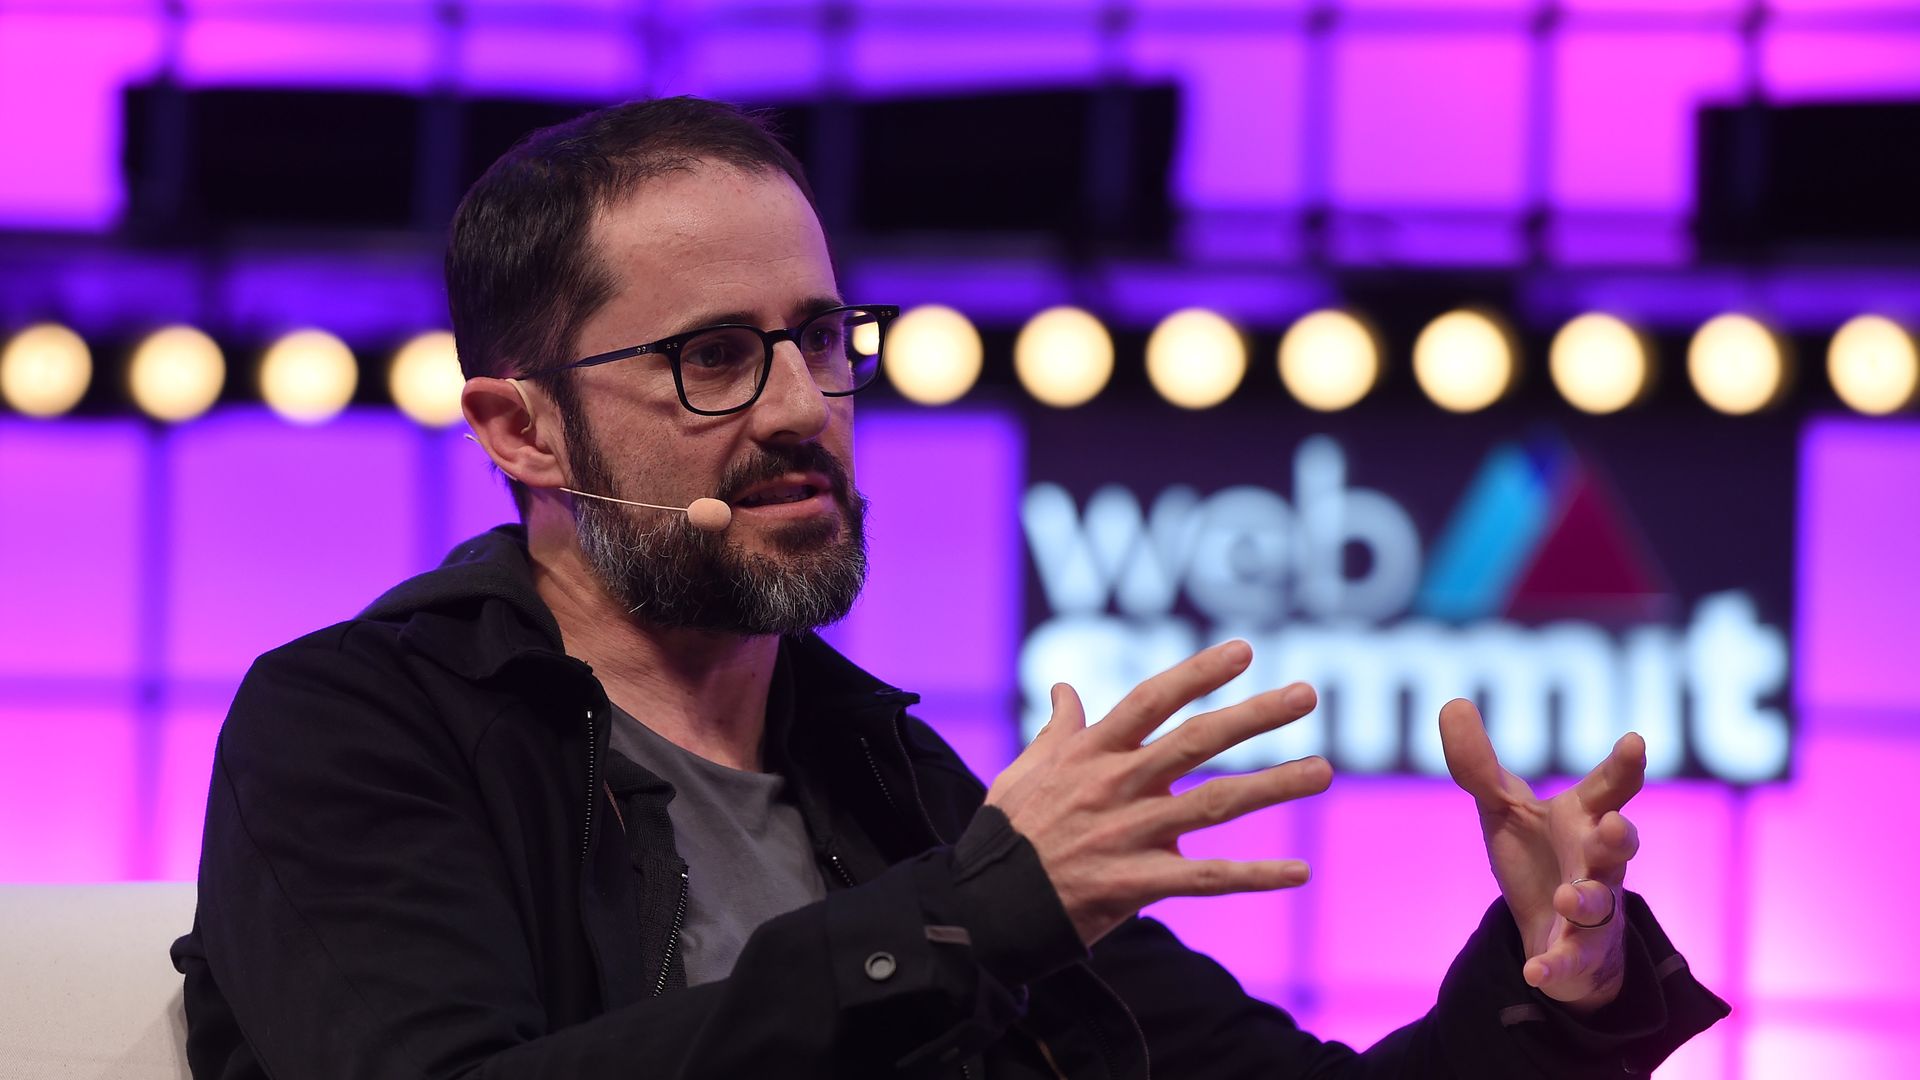 Photo of Twitter co-founder Ev Williams speaking on conference stage.